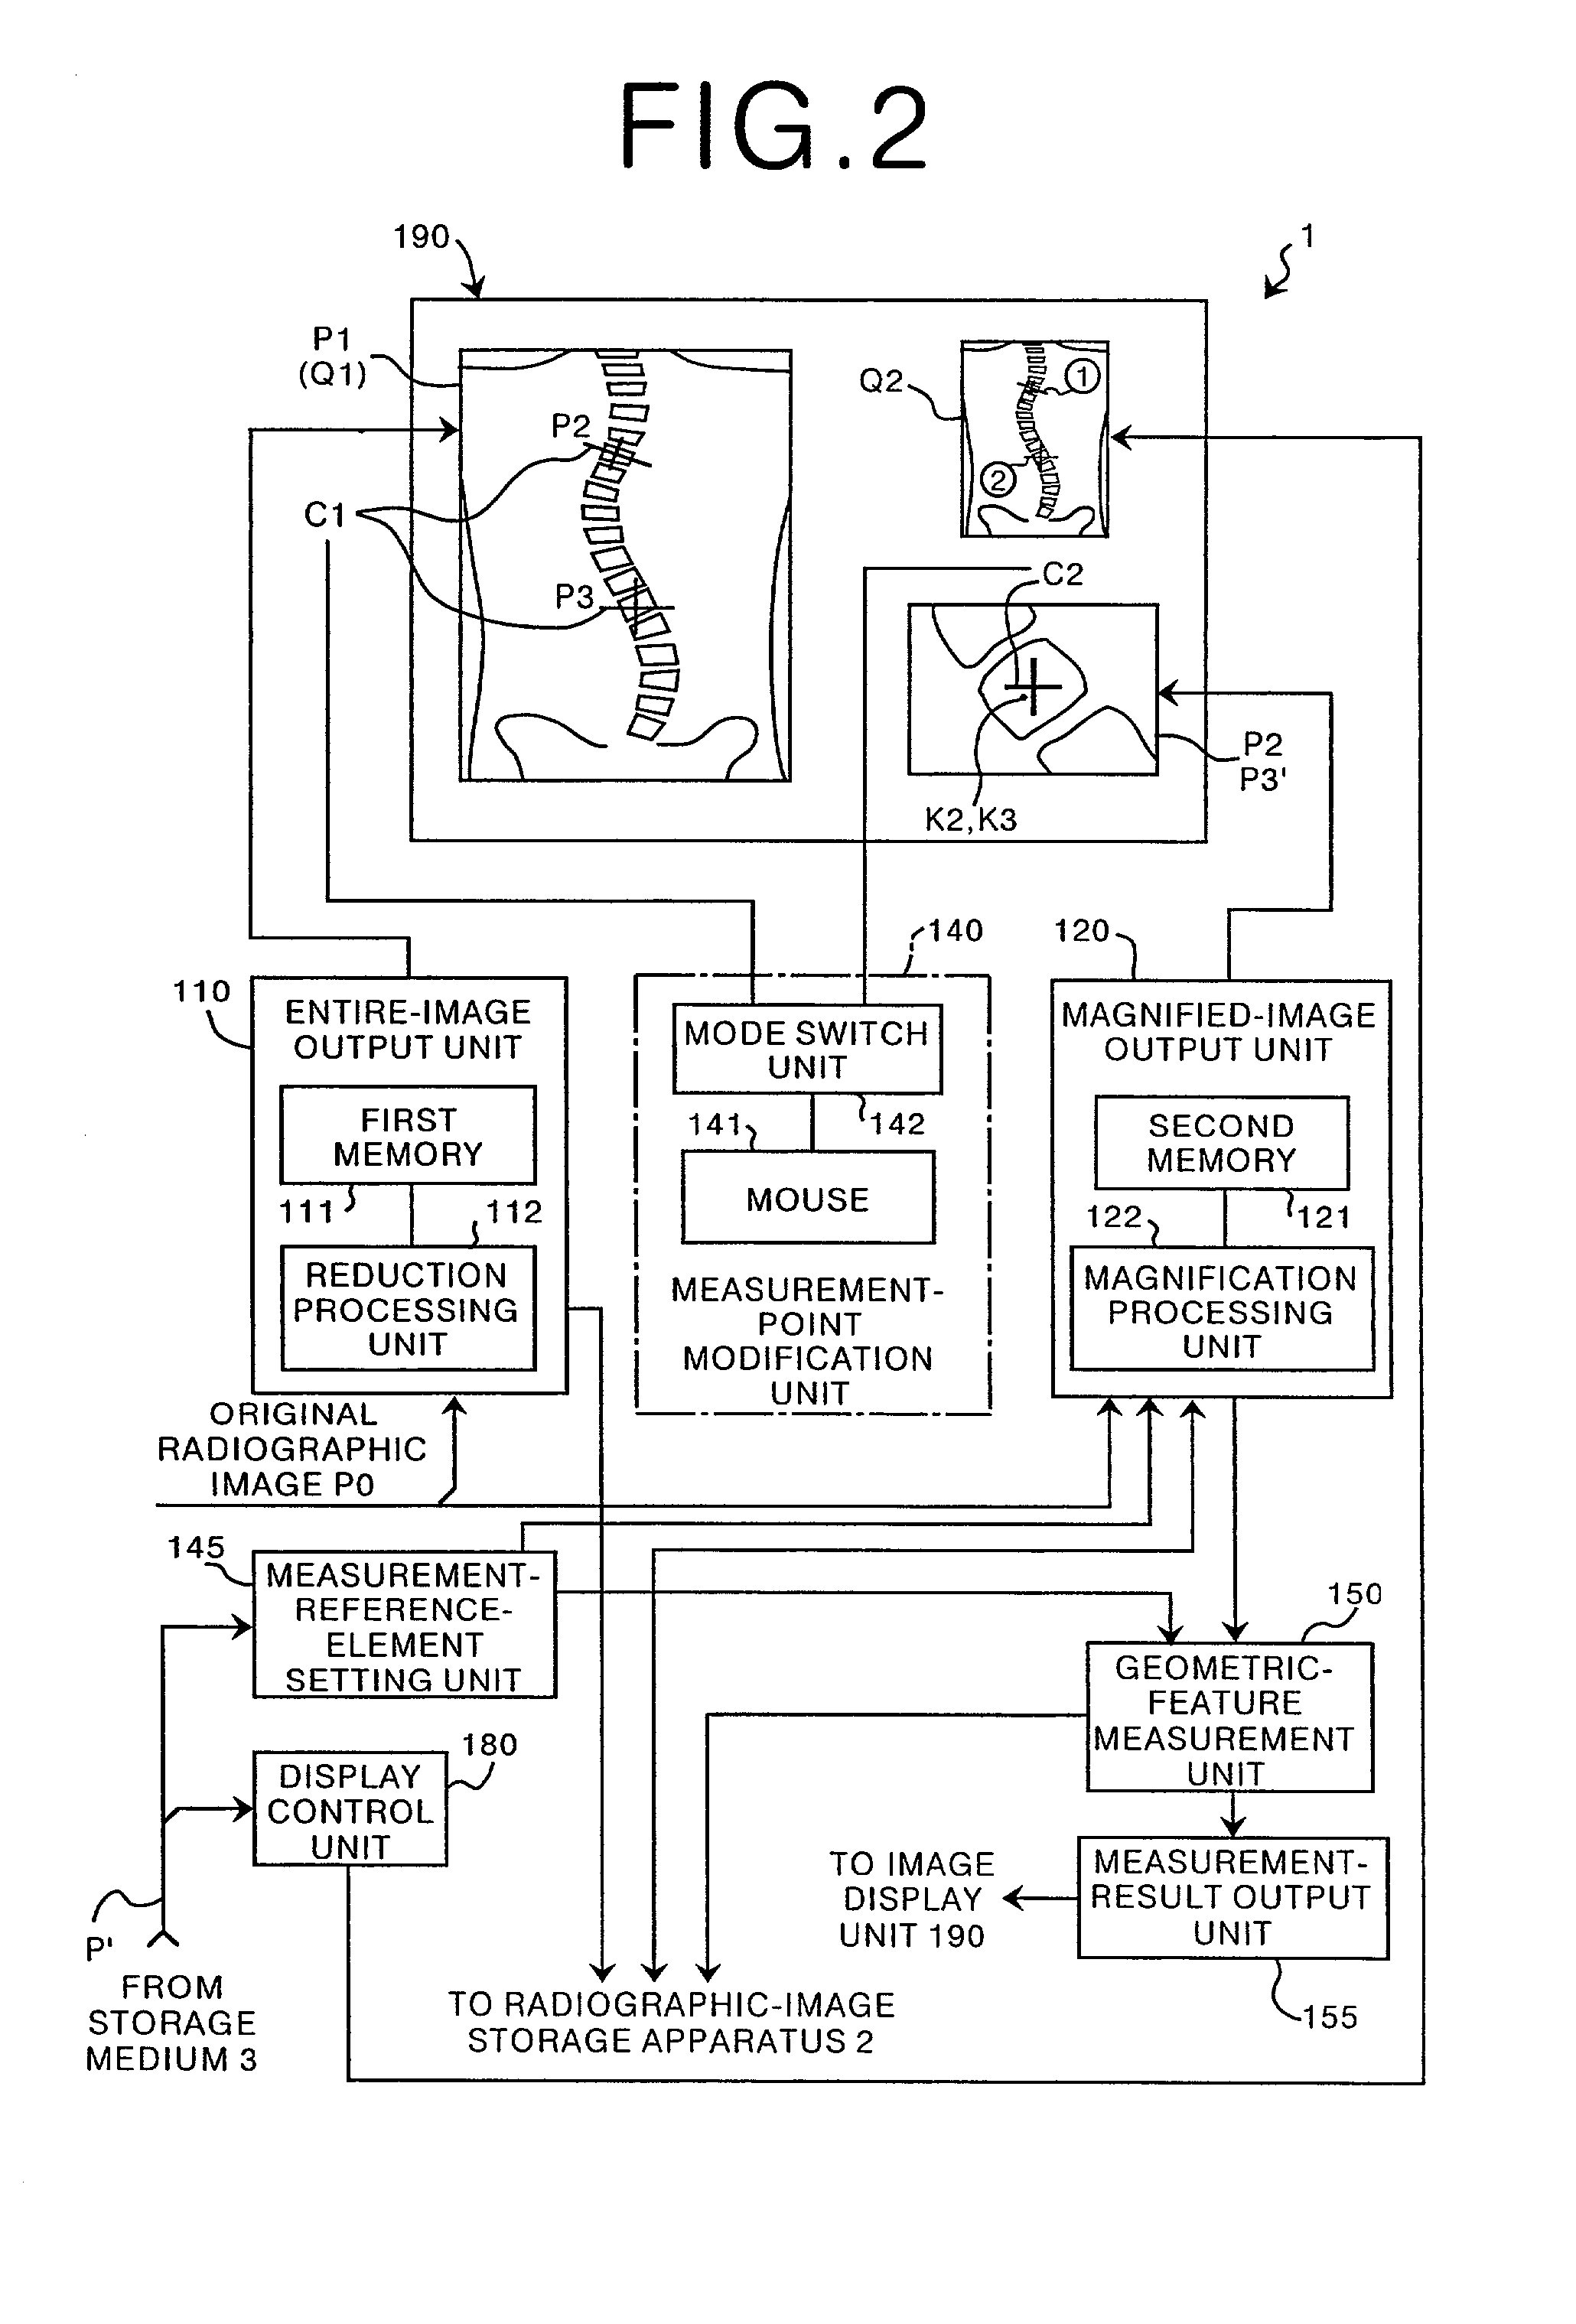 Apparatus for automatically setting measurement reference element and measuring geometric feature of image